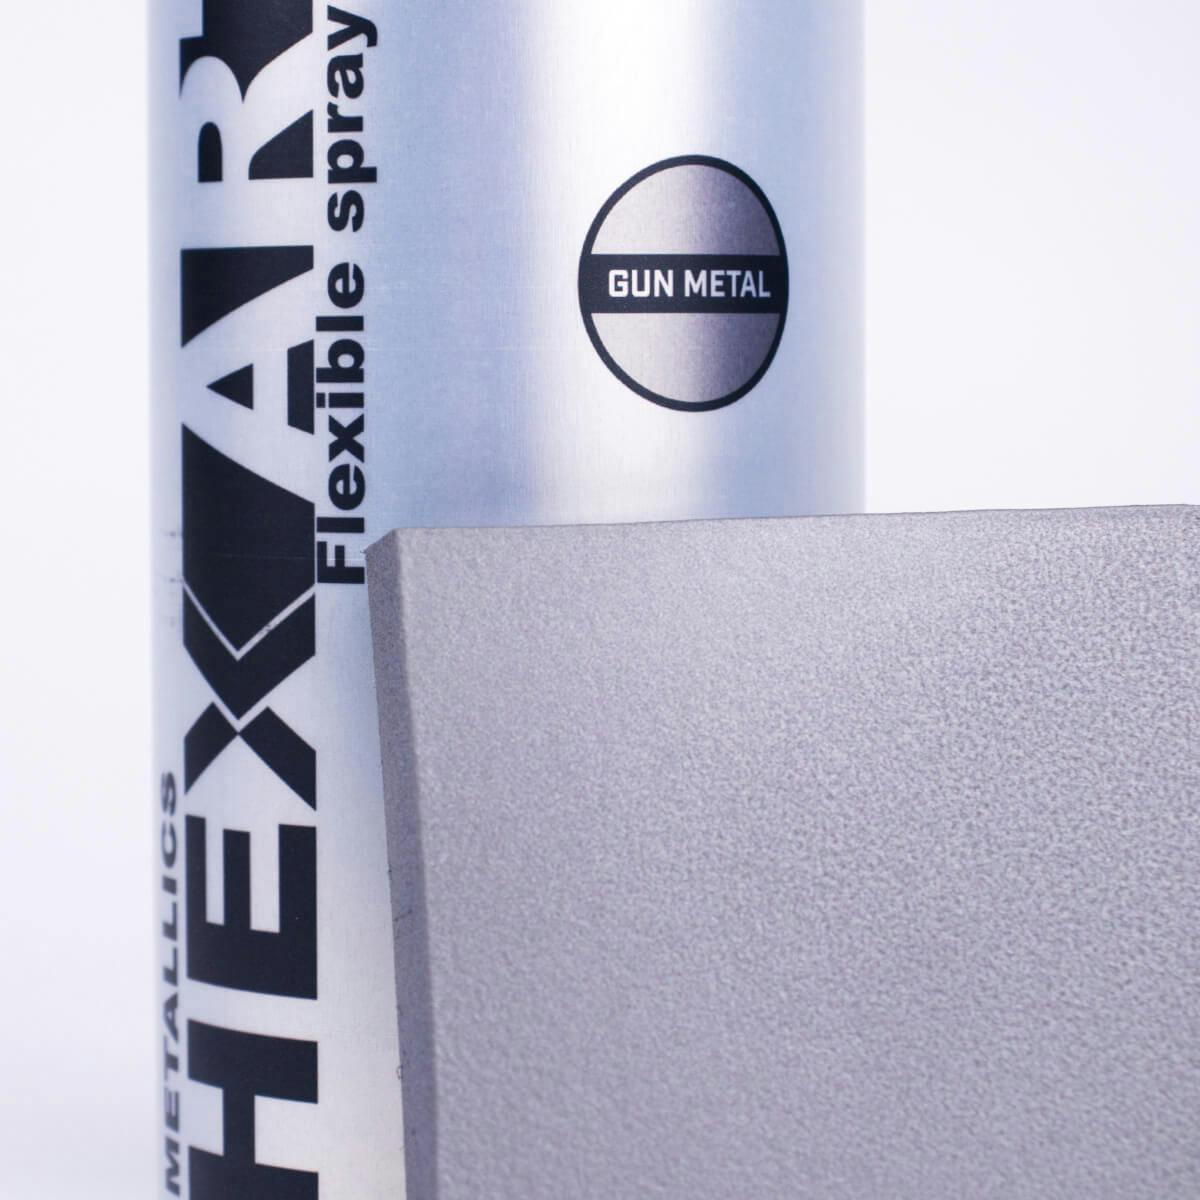 Container and sample of gun metal HexArt spray paint